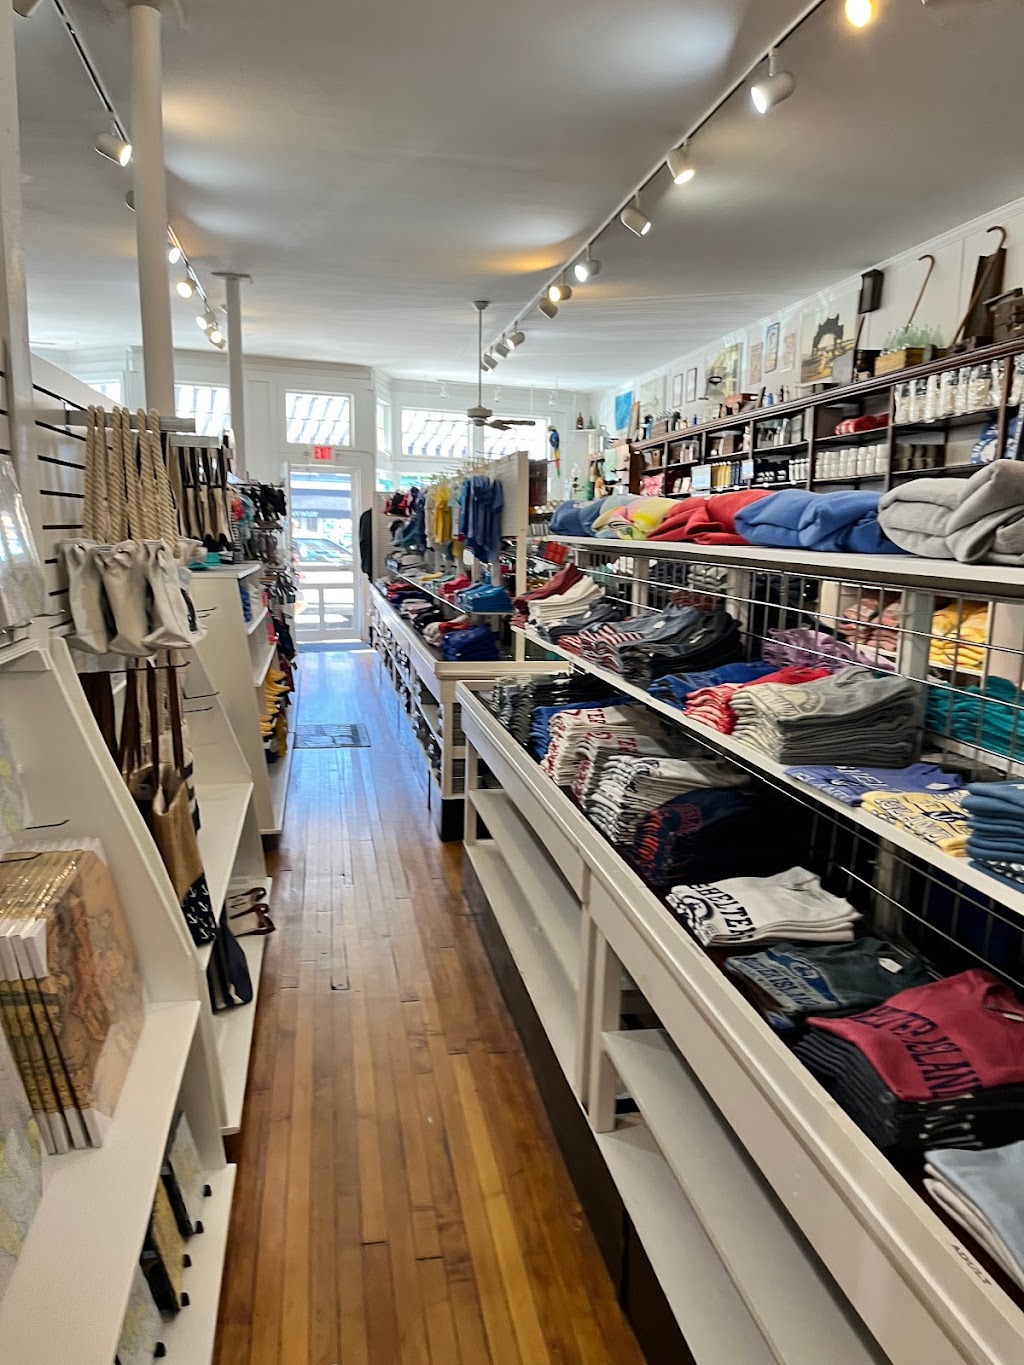 Bliss Department Store | 186 N Ferry Rd, Shelter Island, NY 11964 | Phone: (631) 749-0041